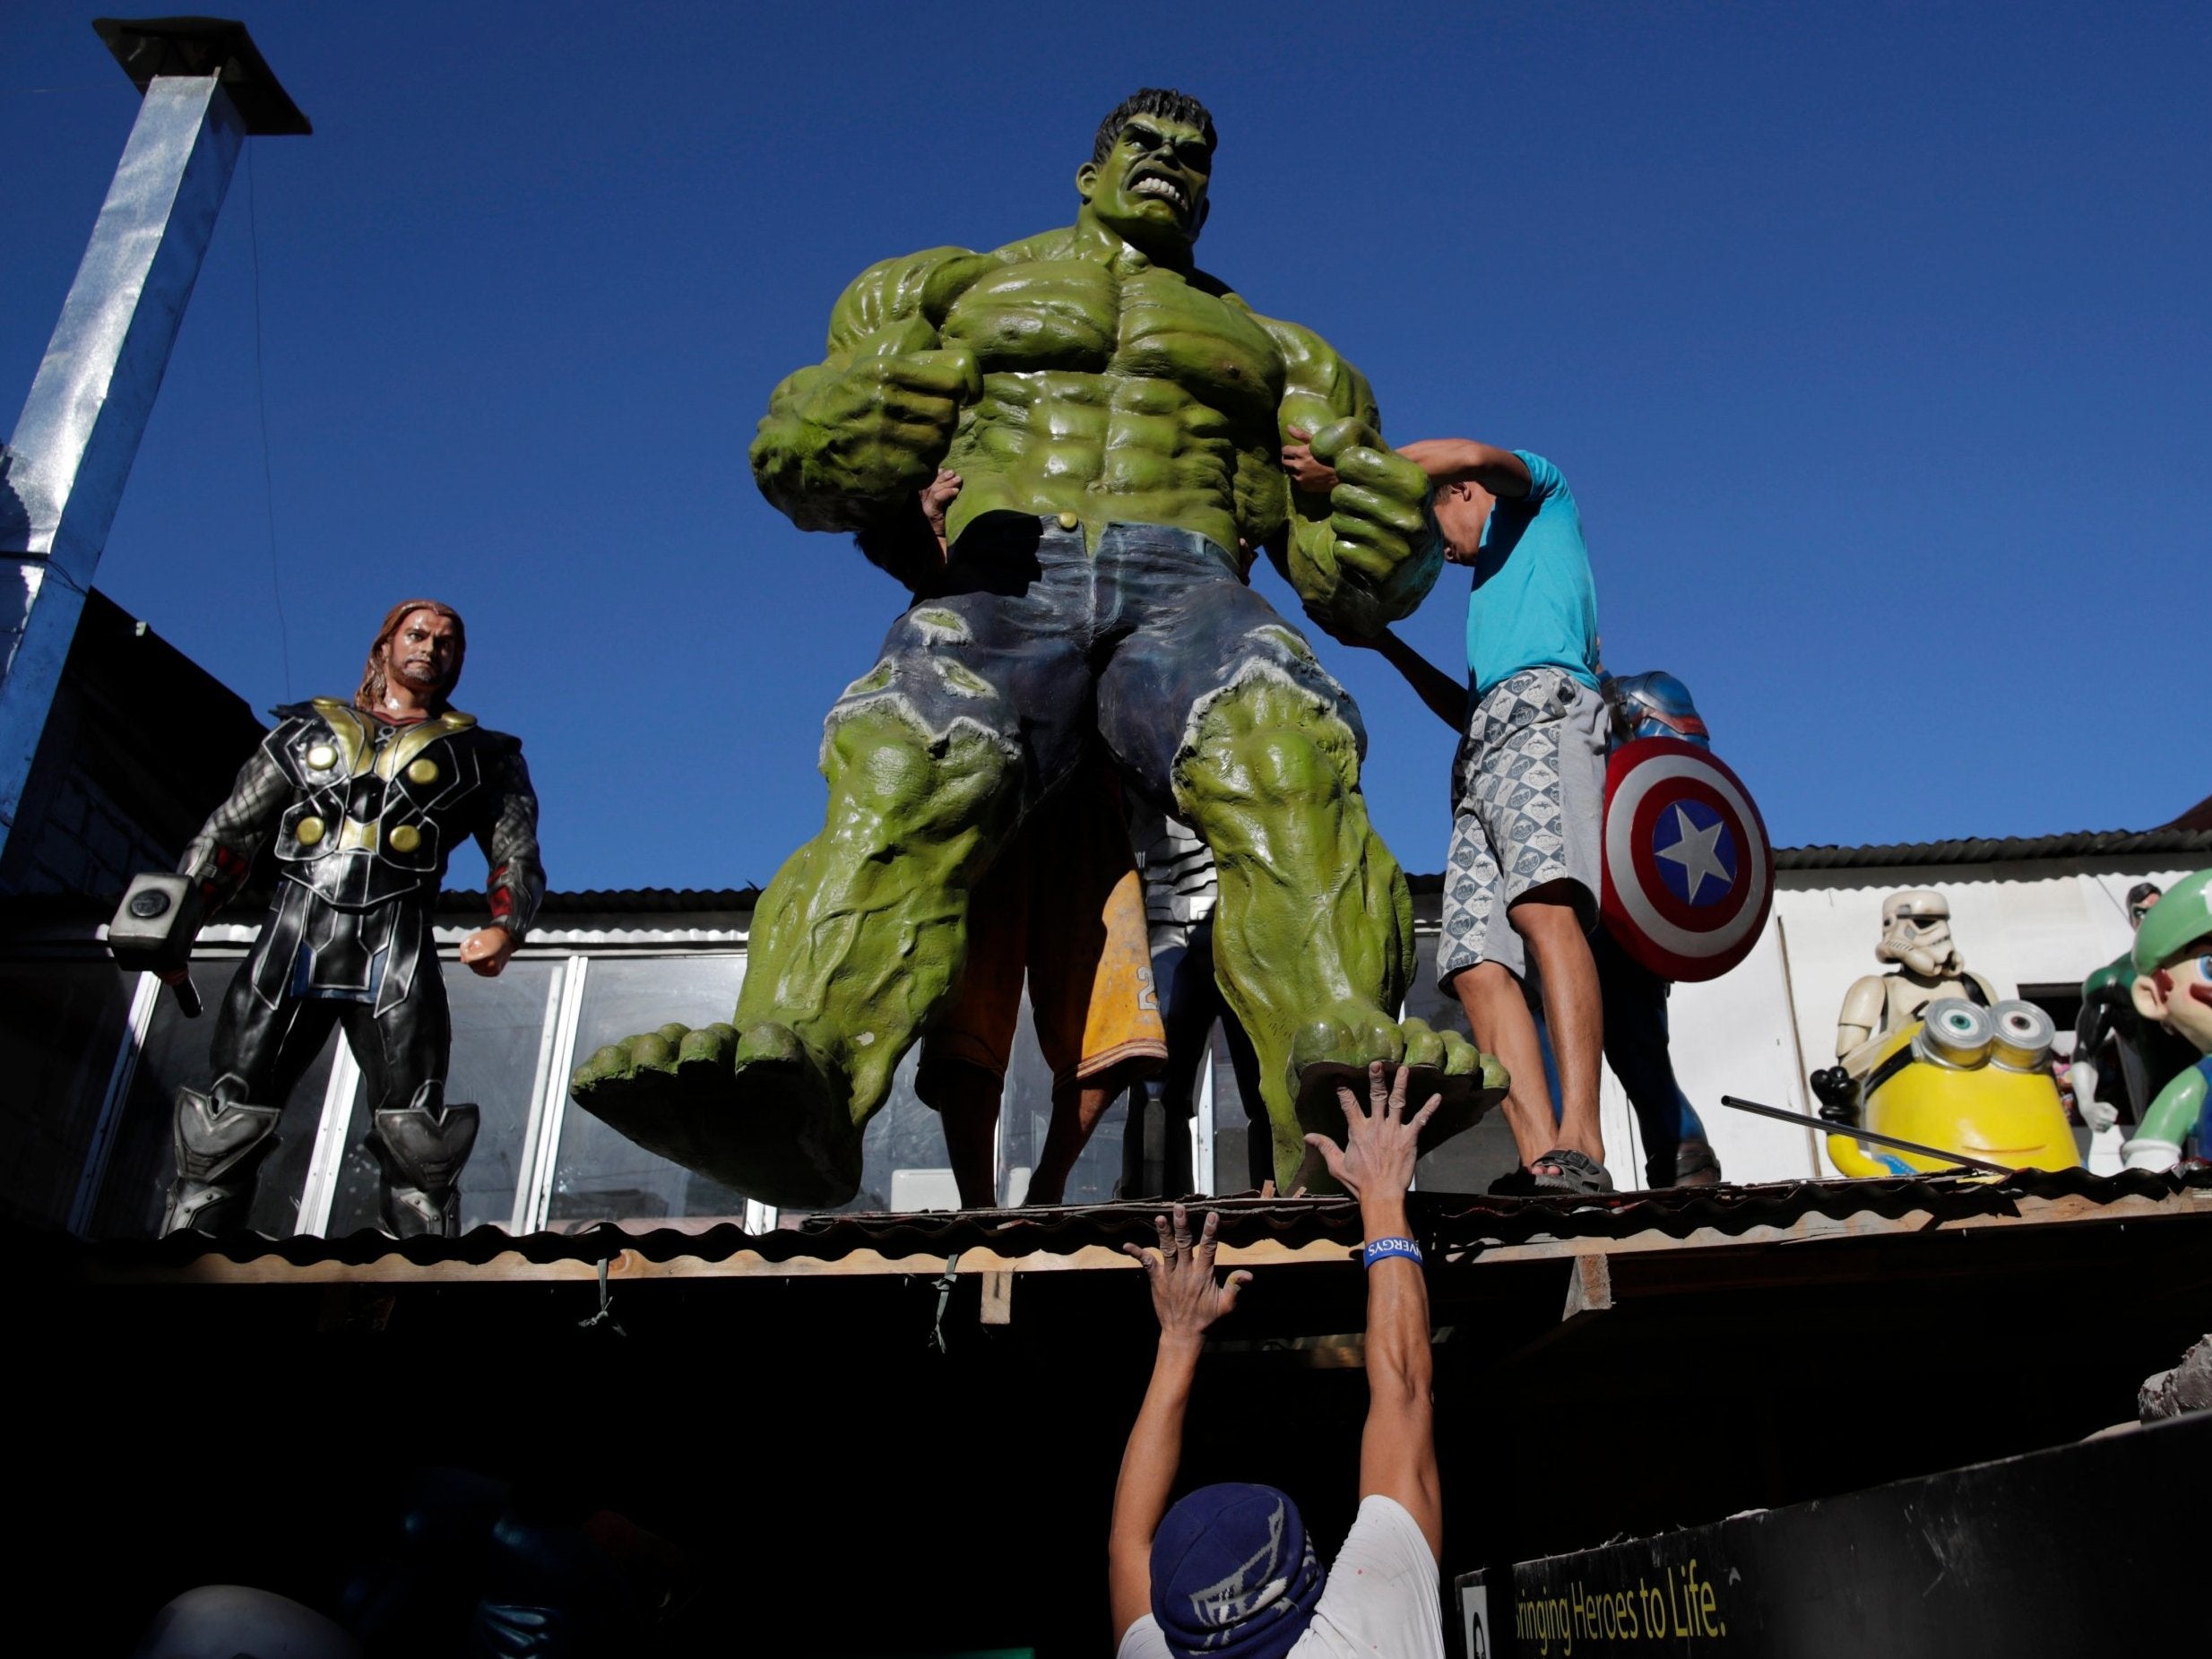 A life-size statue of the Incredible Hulk is put on display in memory of his creator, Stan Lee, who died earlier this month